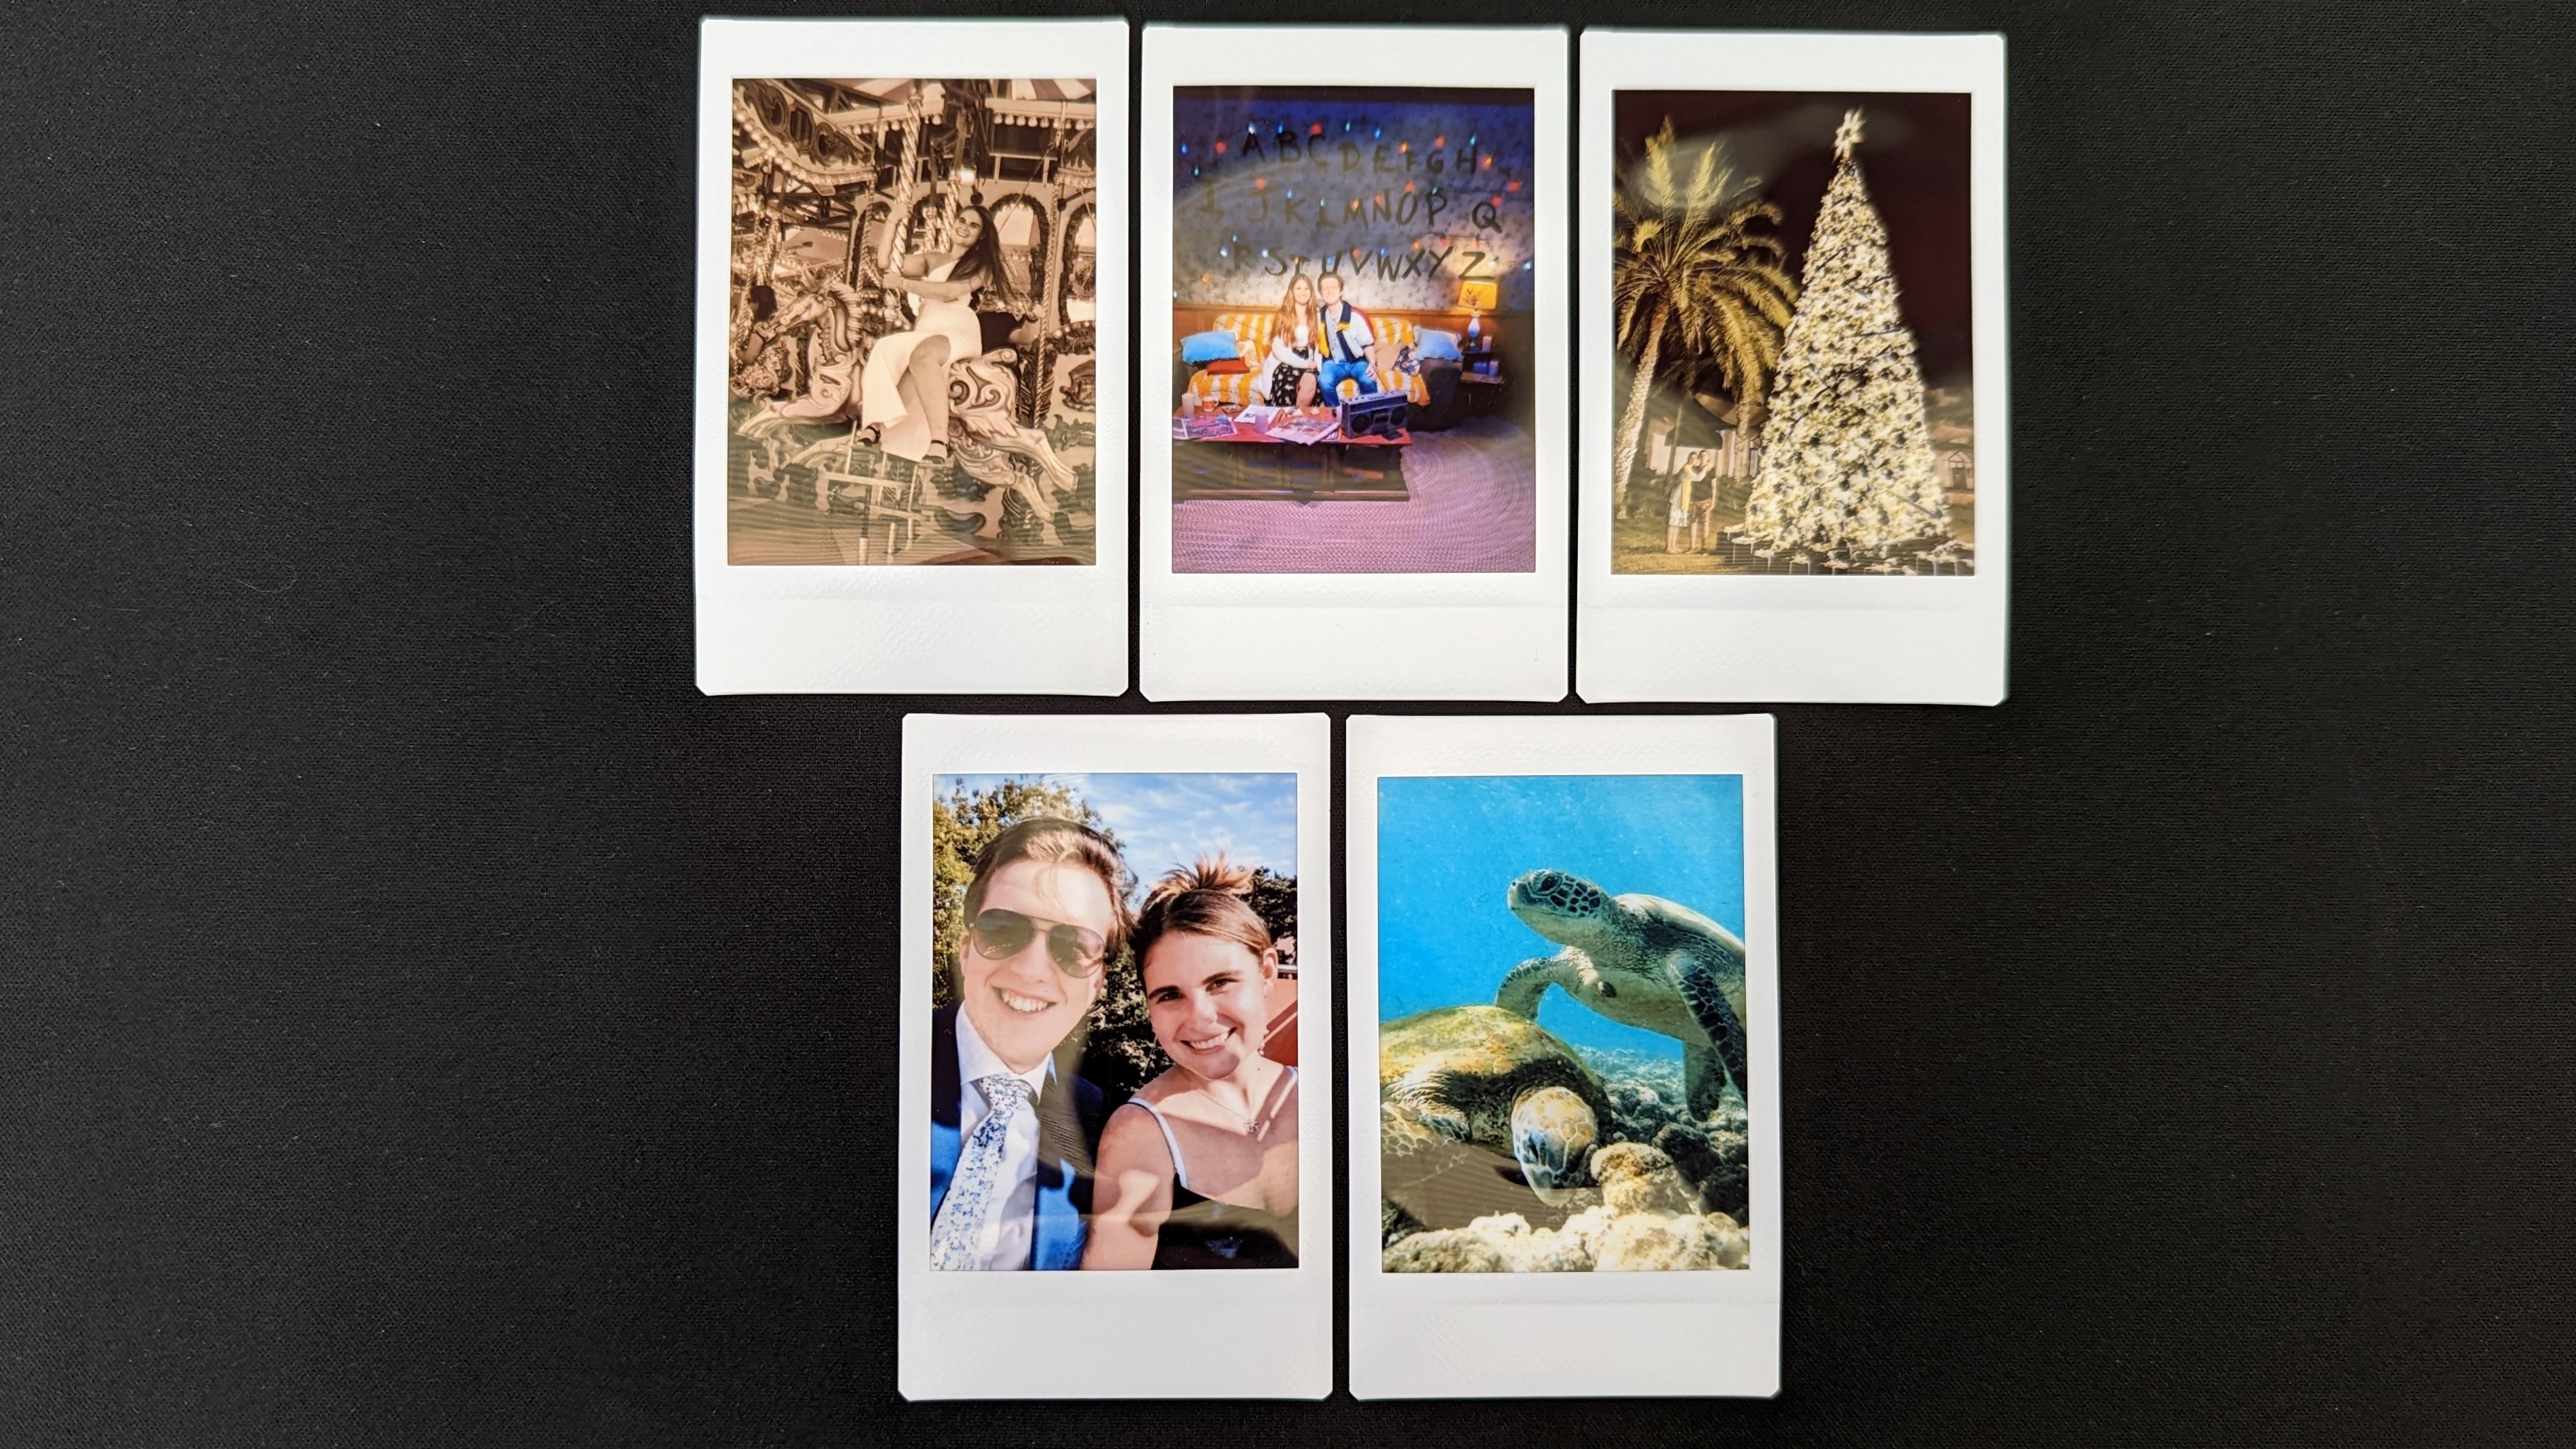 Images captured with the Instax Mini Link 2 include an image of turtles under the sea and a woman riding a carousel